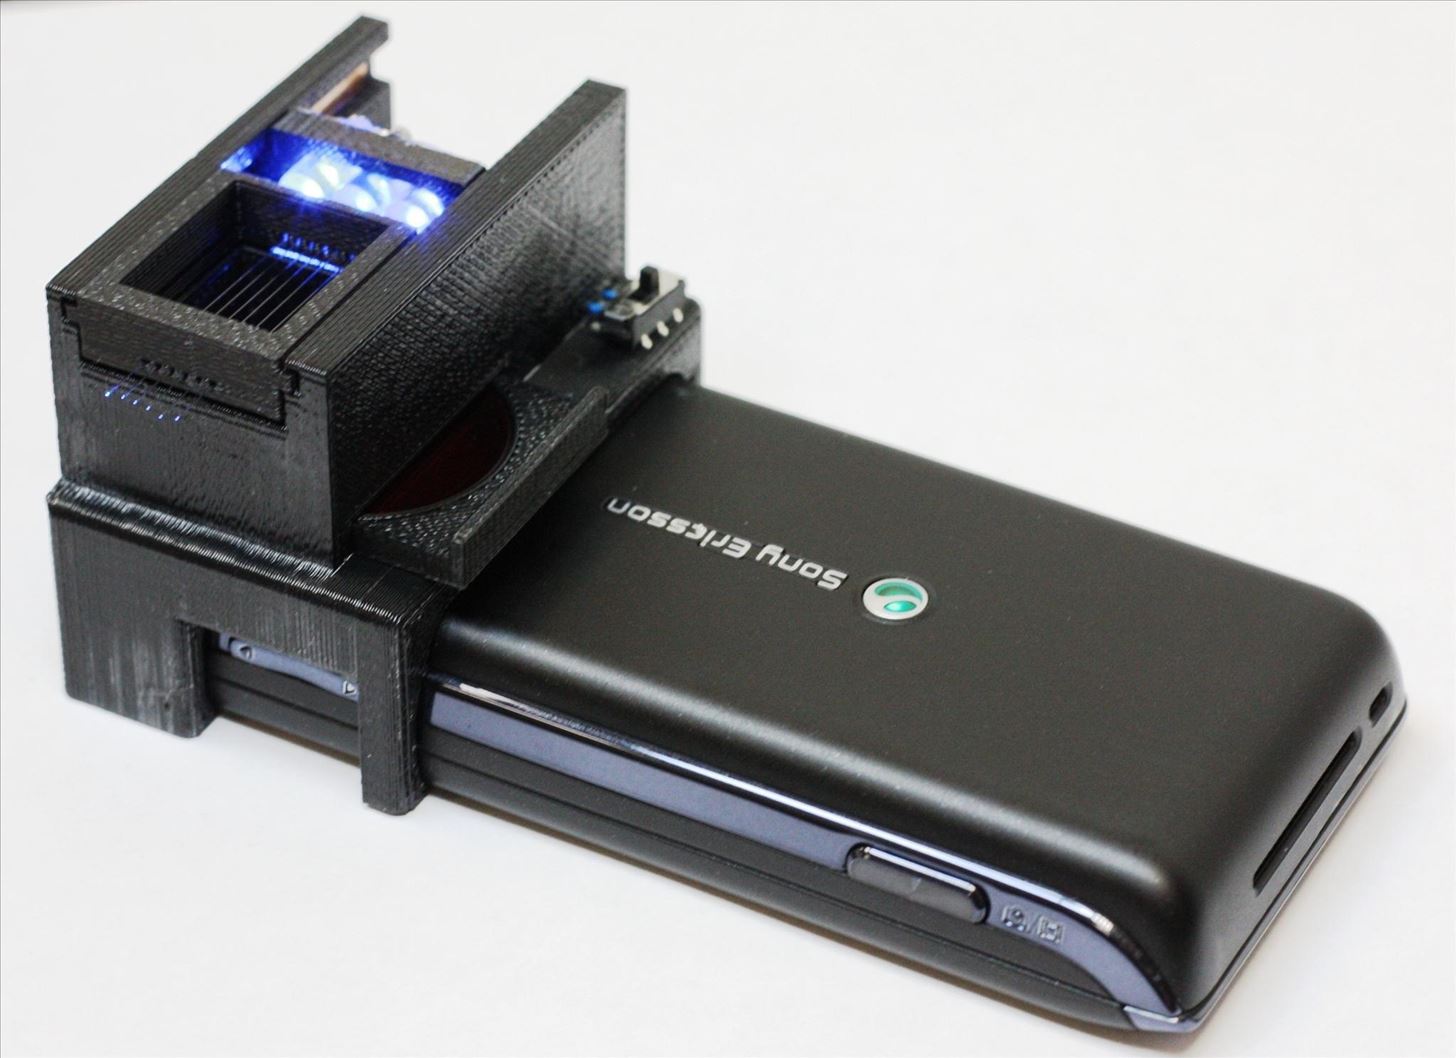 Scan Your Food for E. Coli and Salmonella with This Smartphone-Based Bacteria Detector